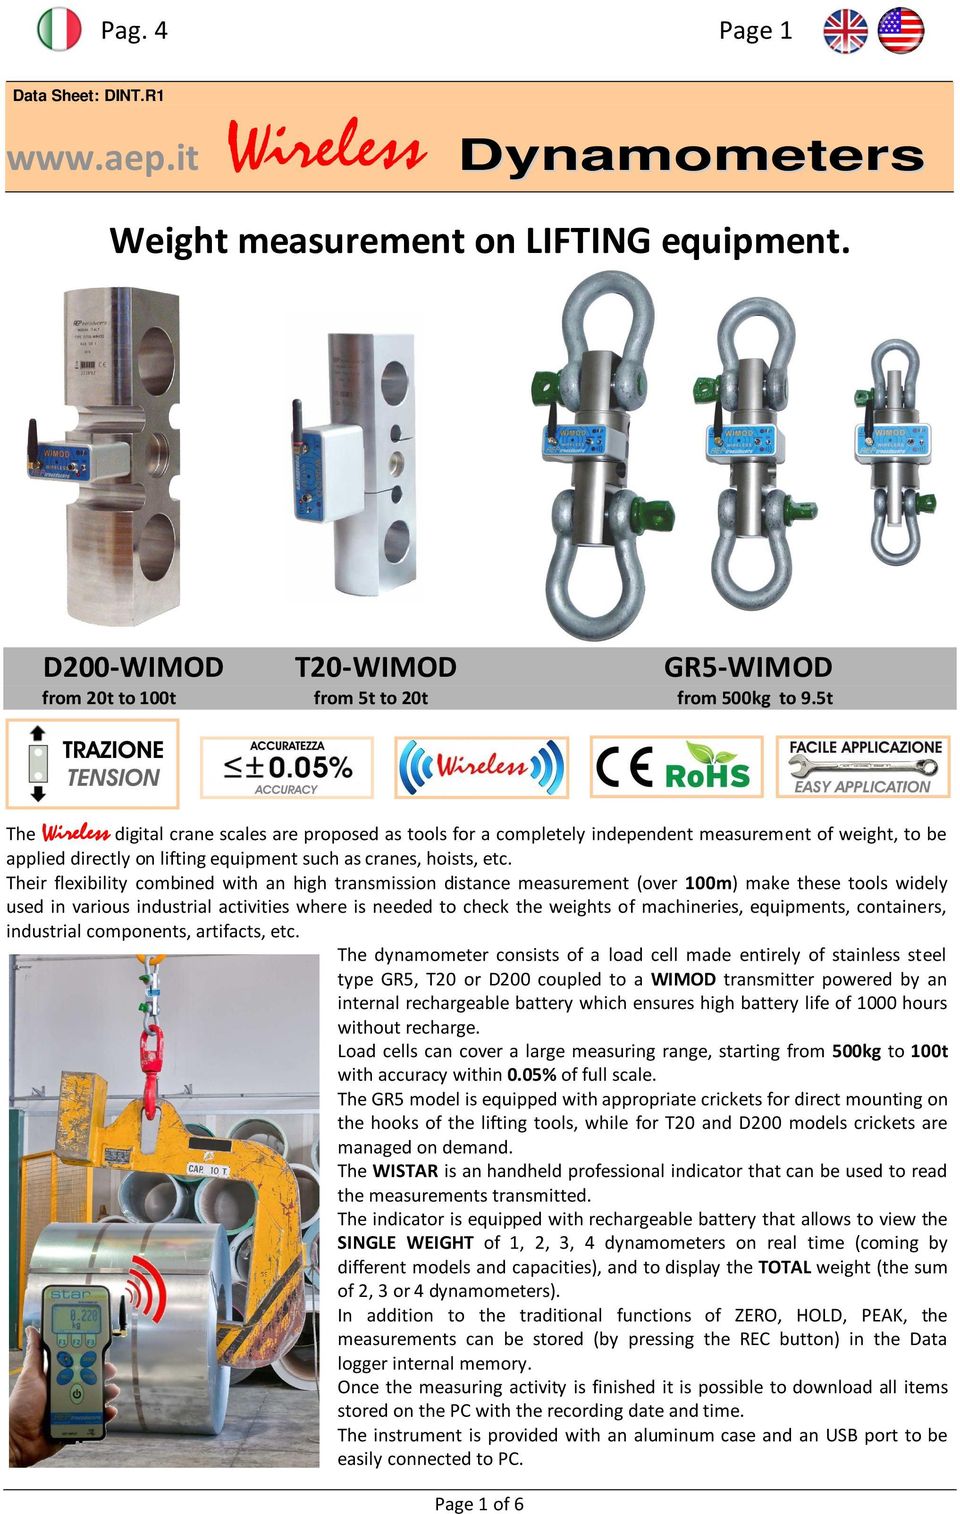 Their flexibility combined with an high transmission distance measurement (over 100m) make these tools widely used in various industrial activities where is needed to check the weights of